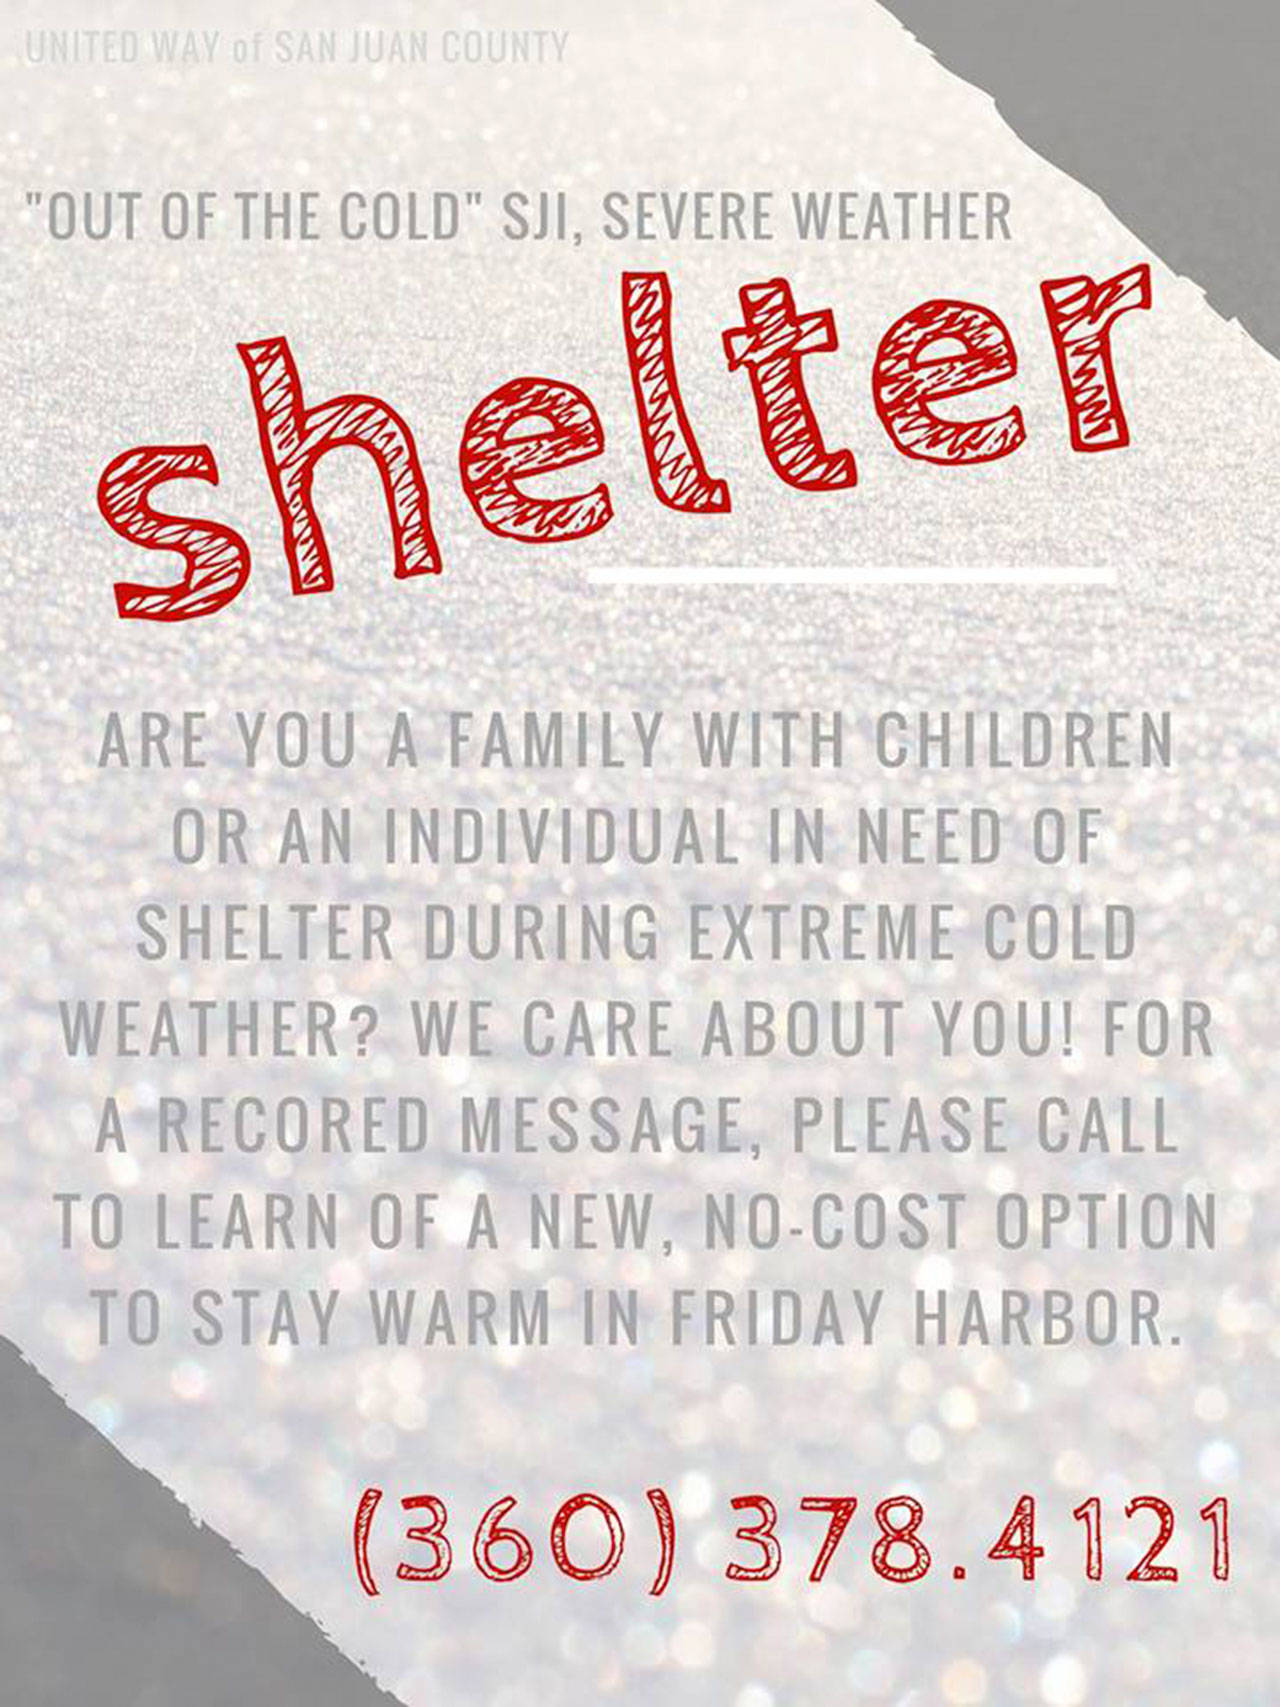 Friday Harbor’s severe weather shelter in review